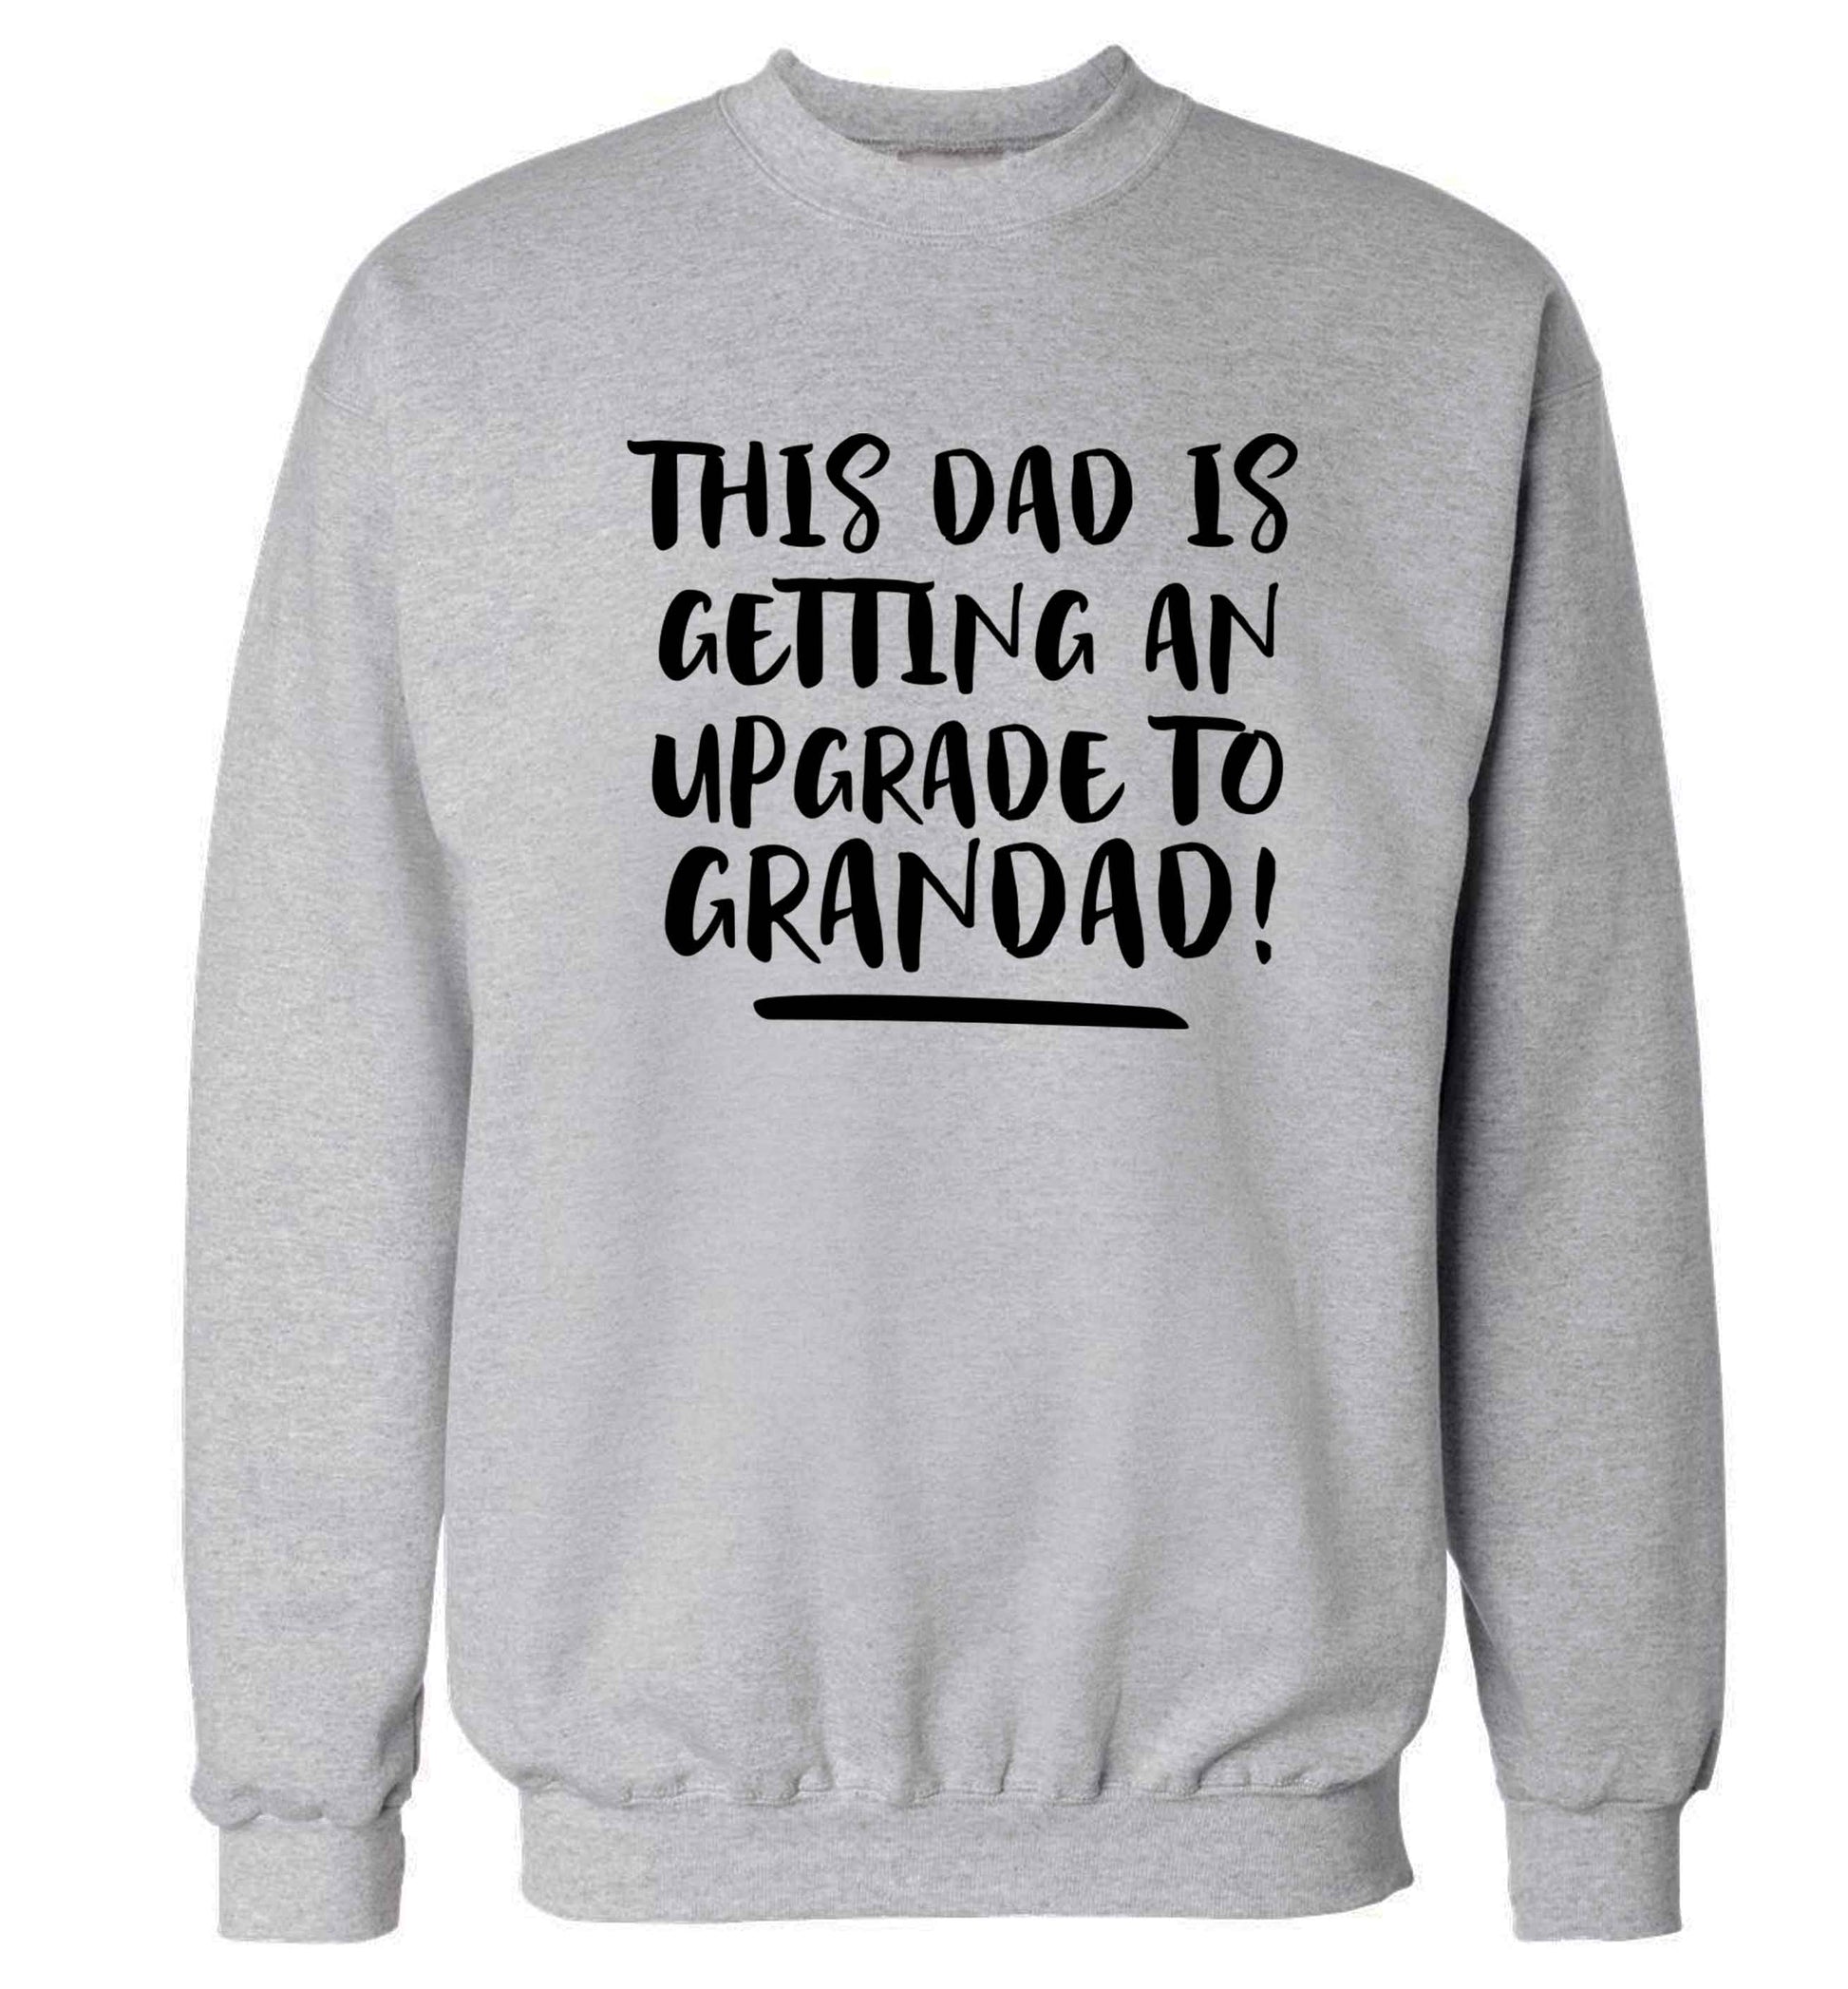 This dad is getting an upgrade to grandad! Adult's unisex grey Sweater 2XL